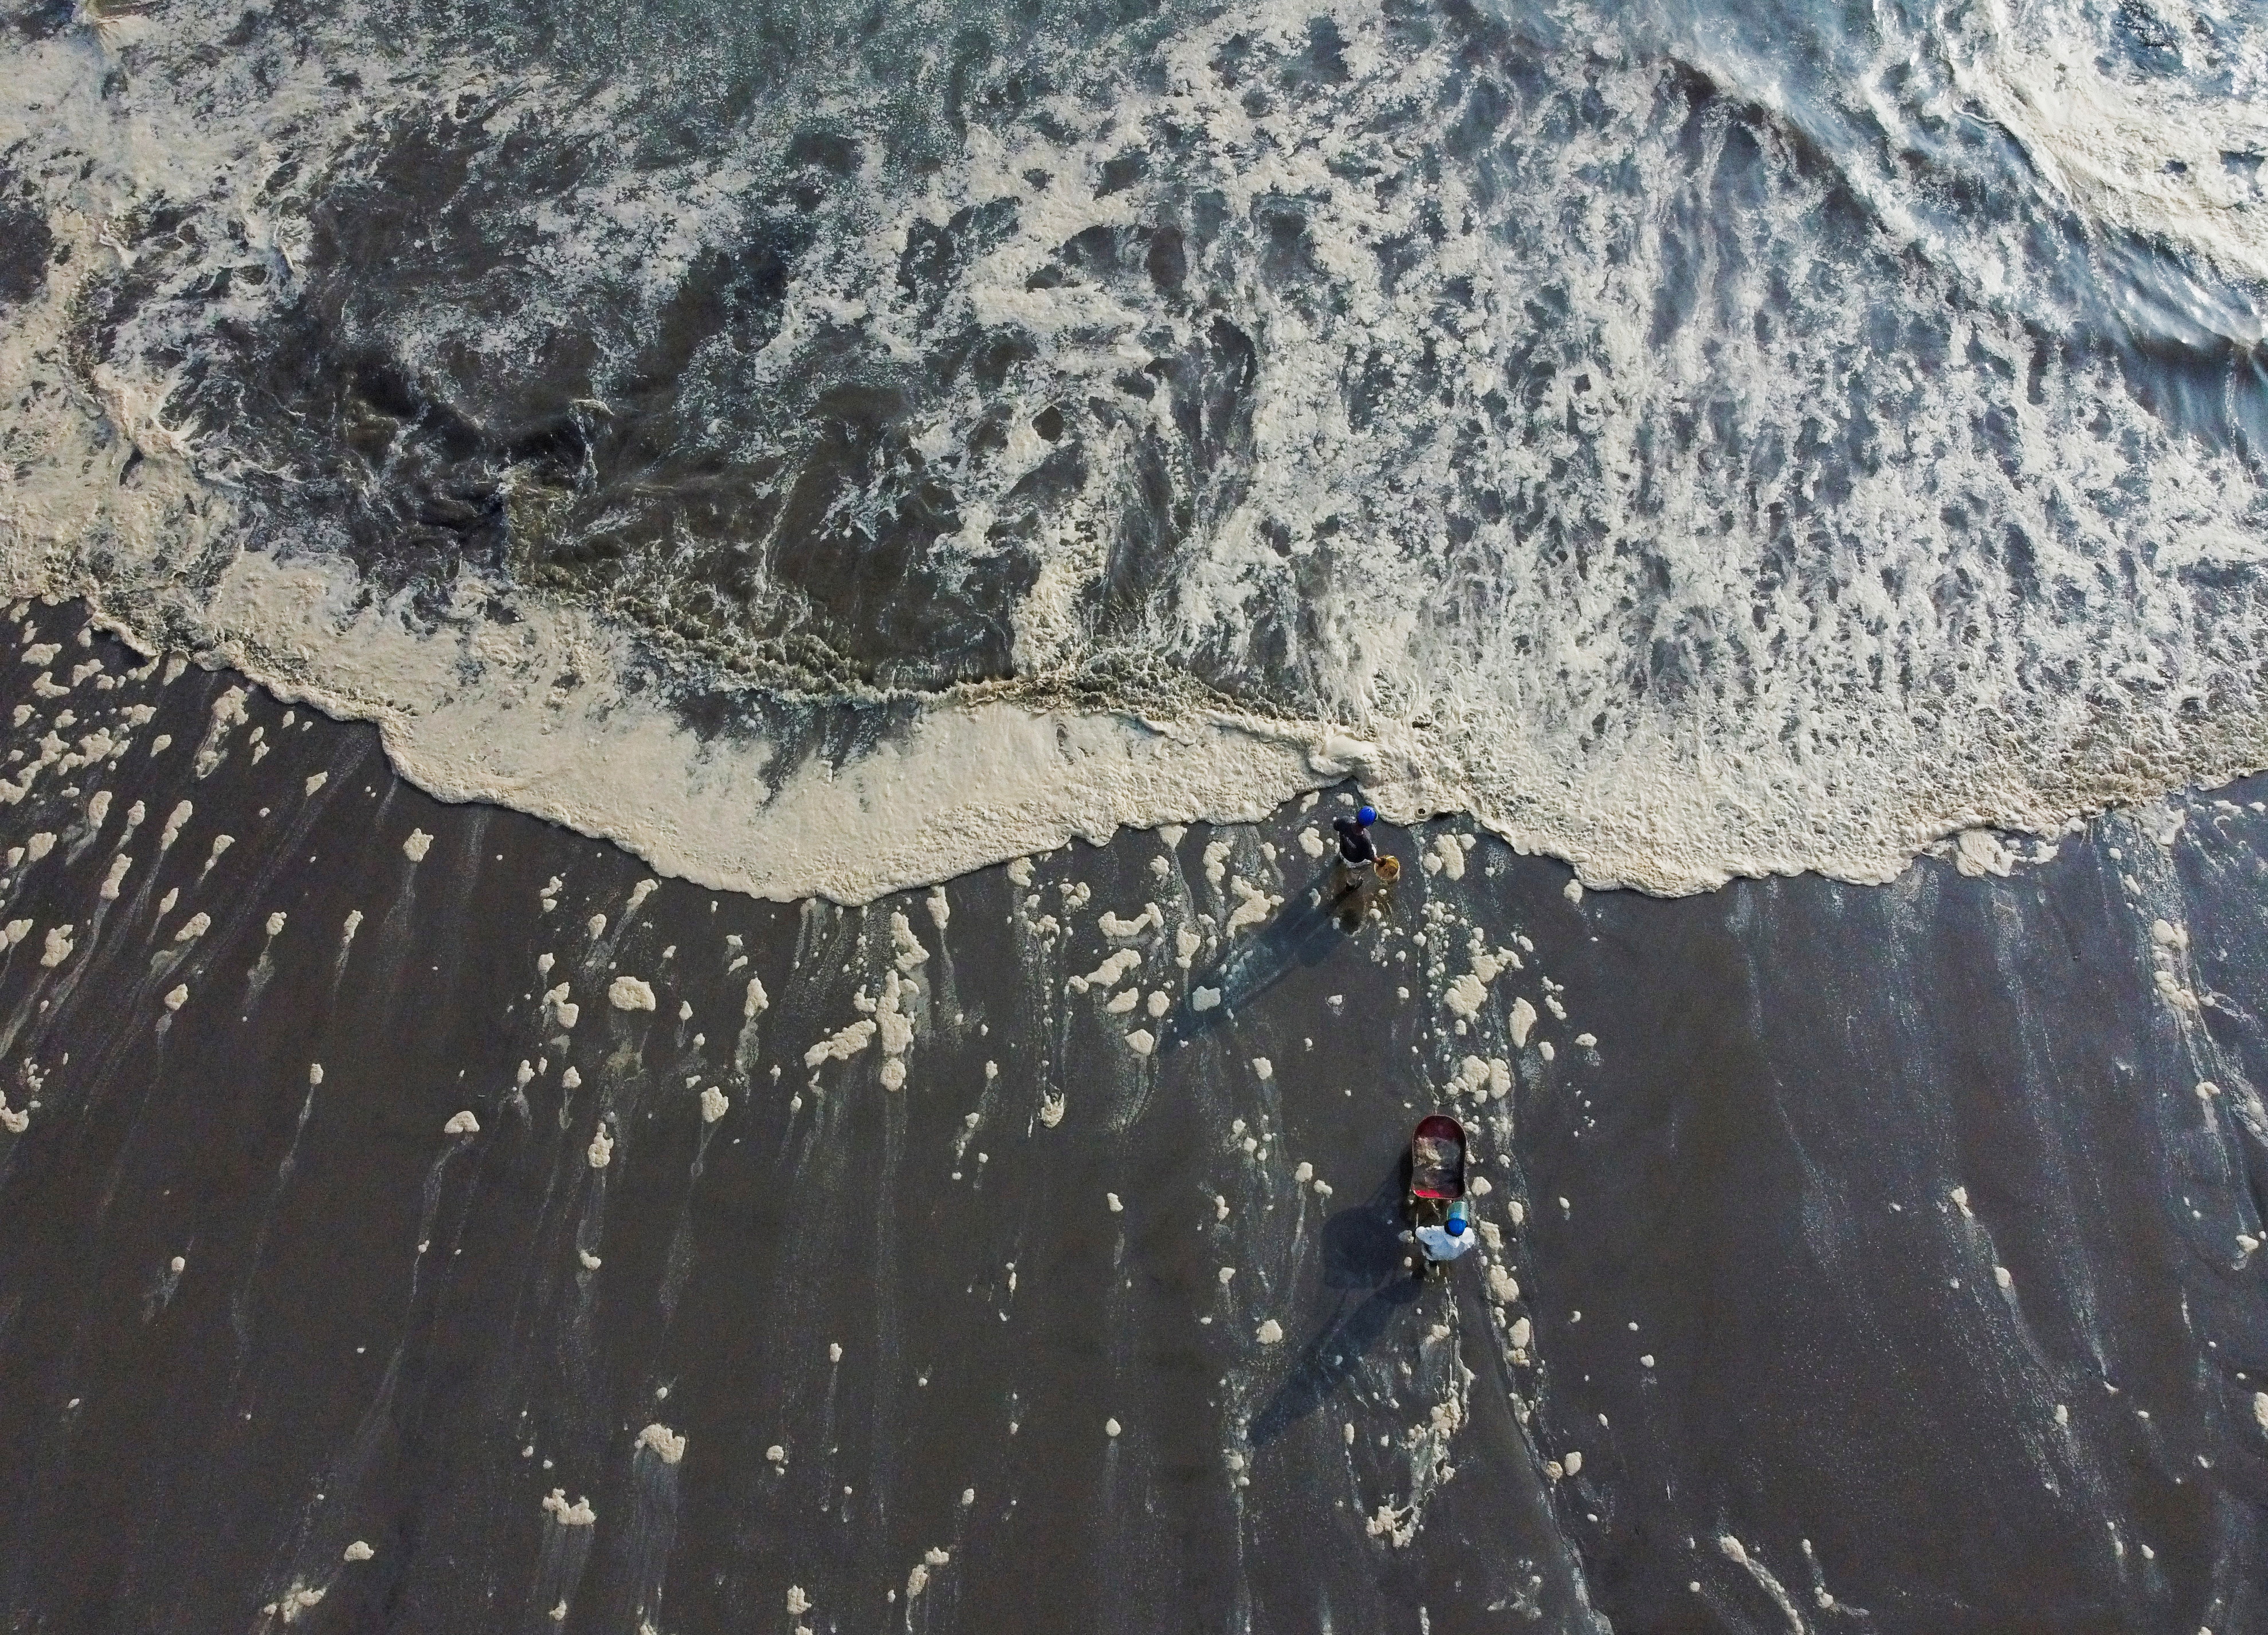 Workers walk through foam on a shore affected by an oil spill caused by abnormal waves, triggered by a massive underwater volcanic eruption in Tonga, off the coast of Lima, in Ventanilla, Peru, January 19, 2022. Picture taken with a drone. REUTERS/Angela Ponce